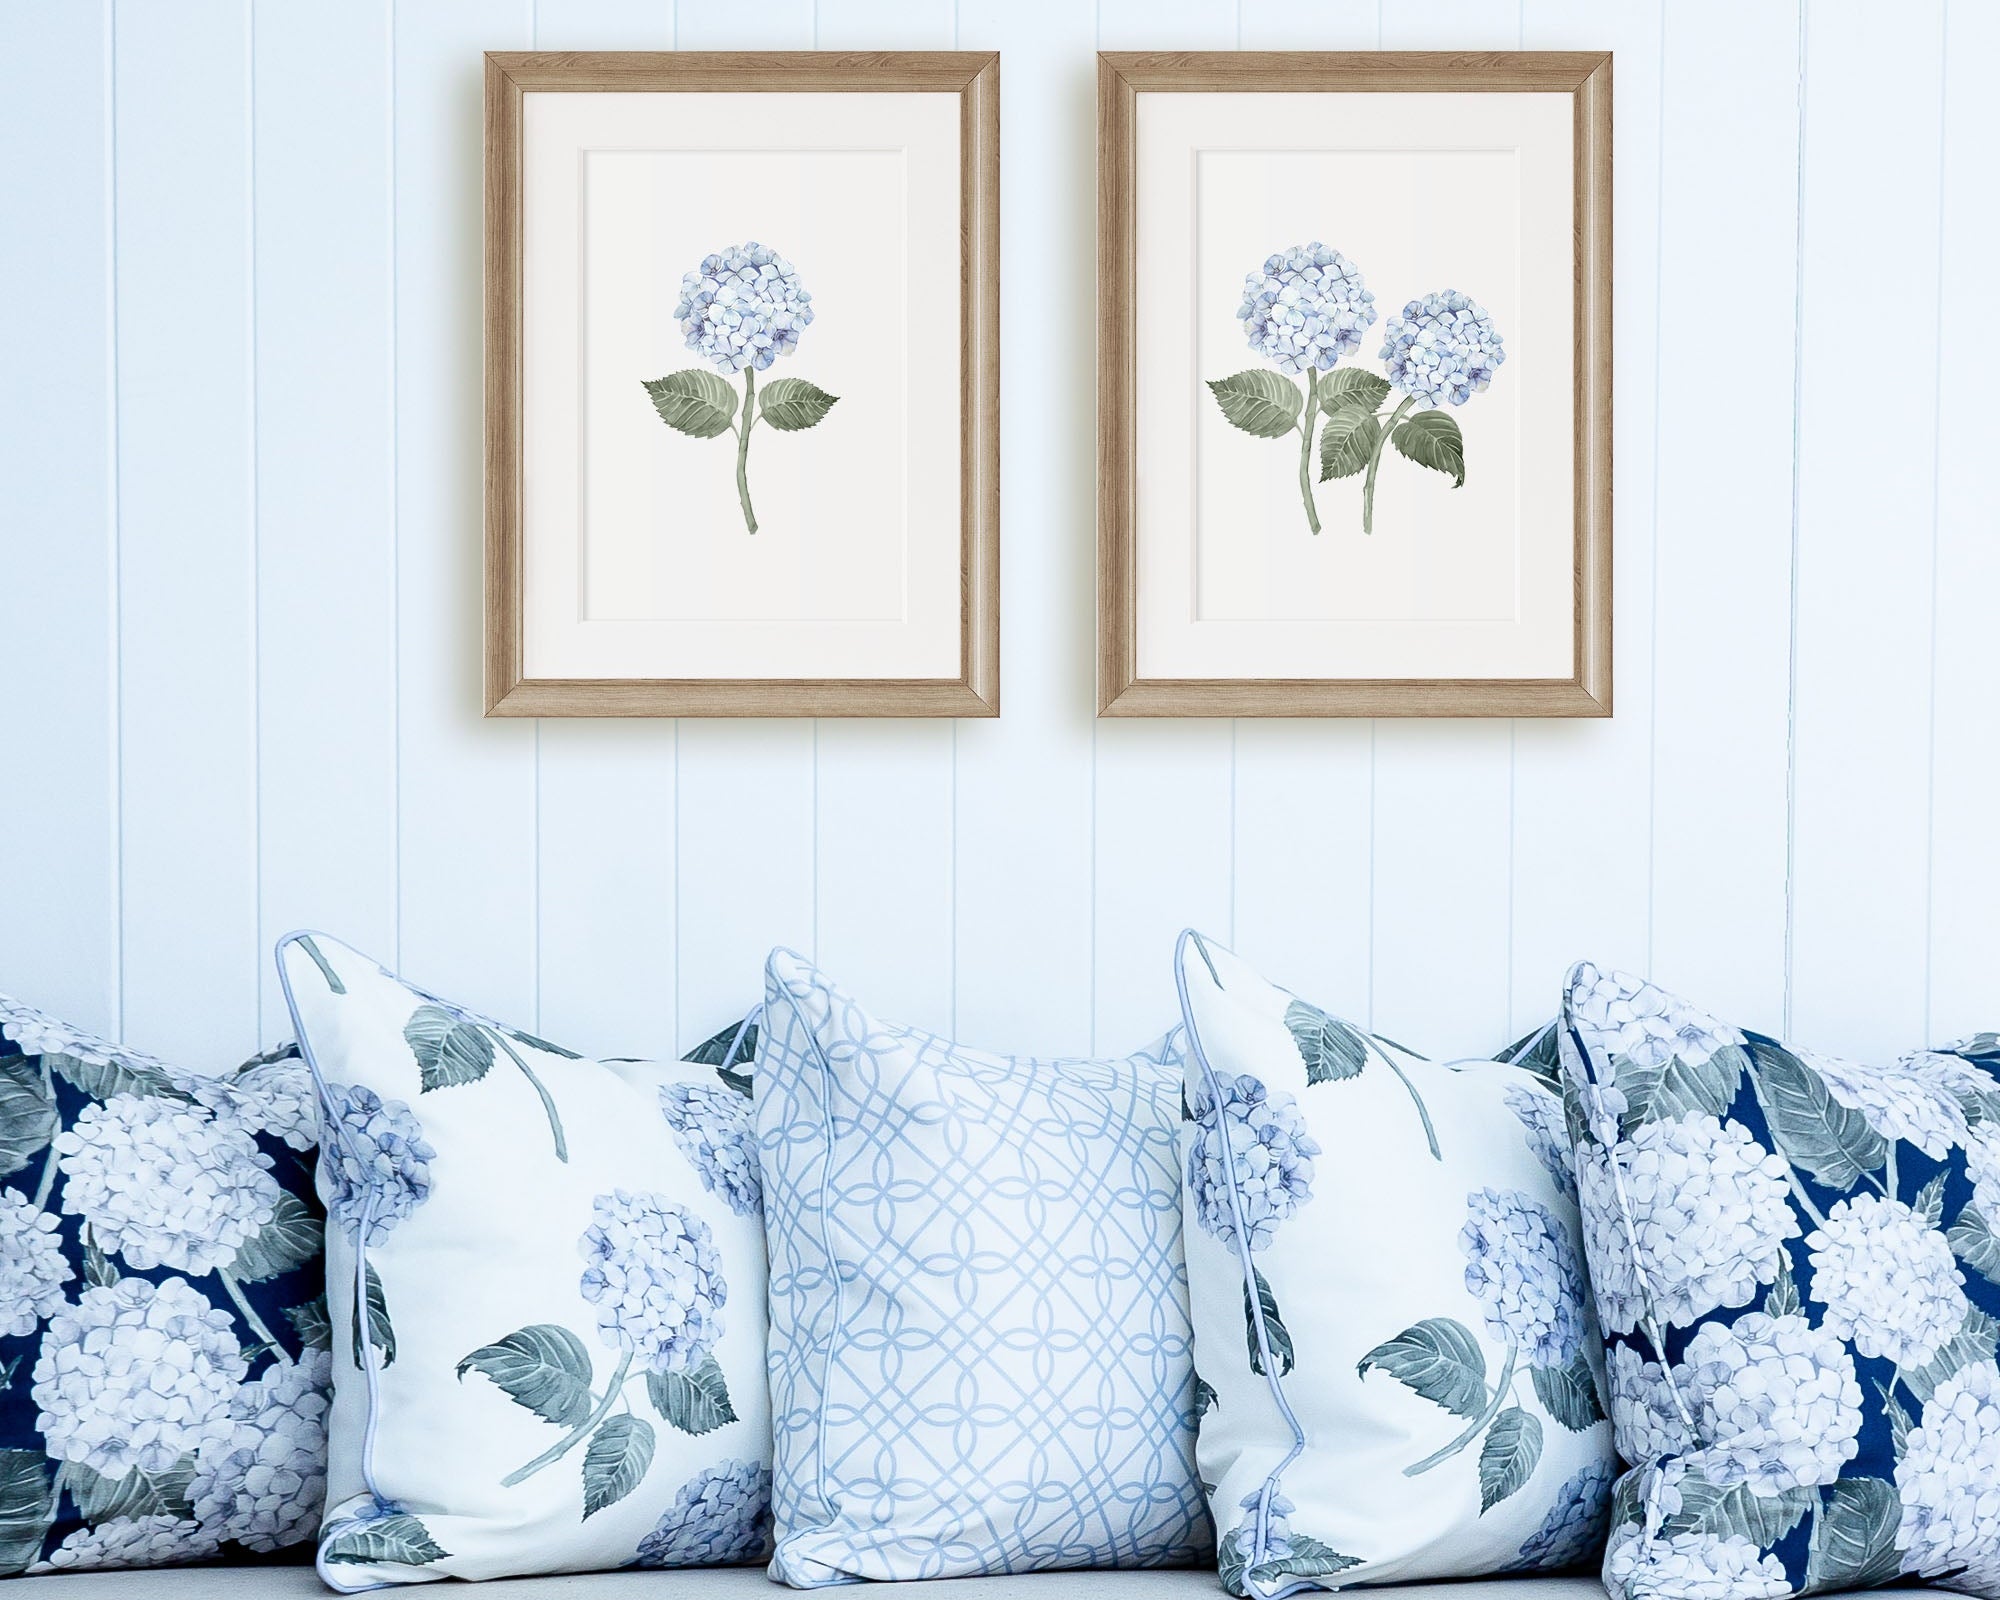 Where to Buy Standard Size Picture Frames in Australia - Hydrangea Lane Home